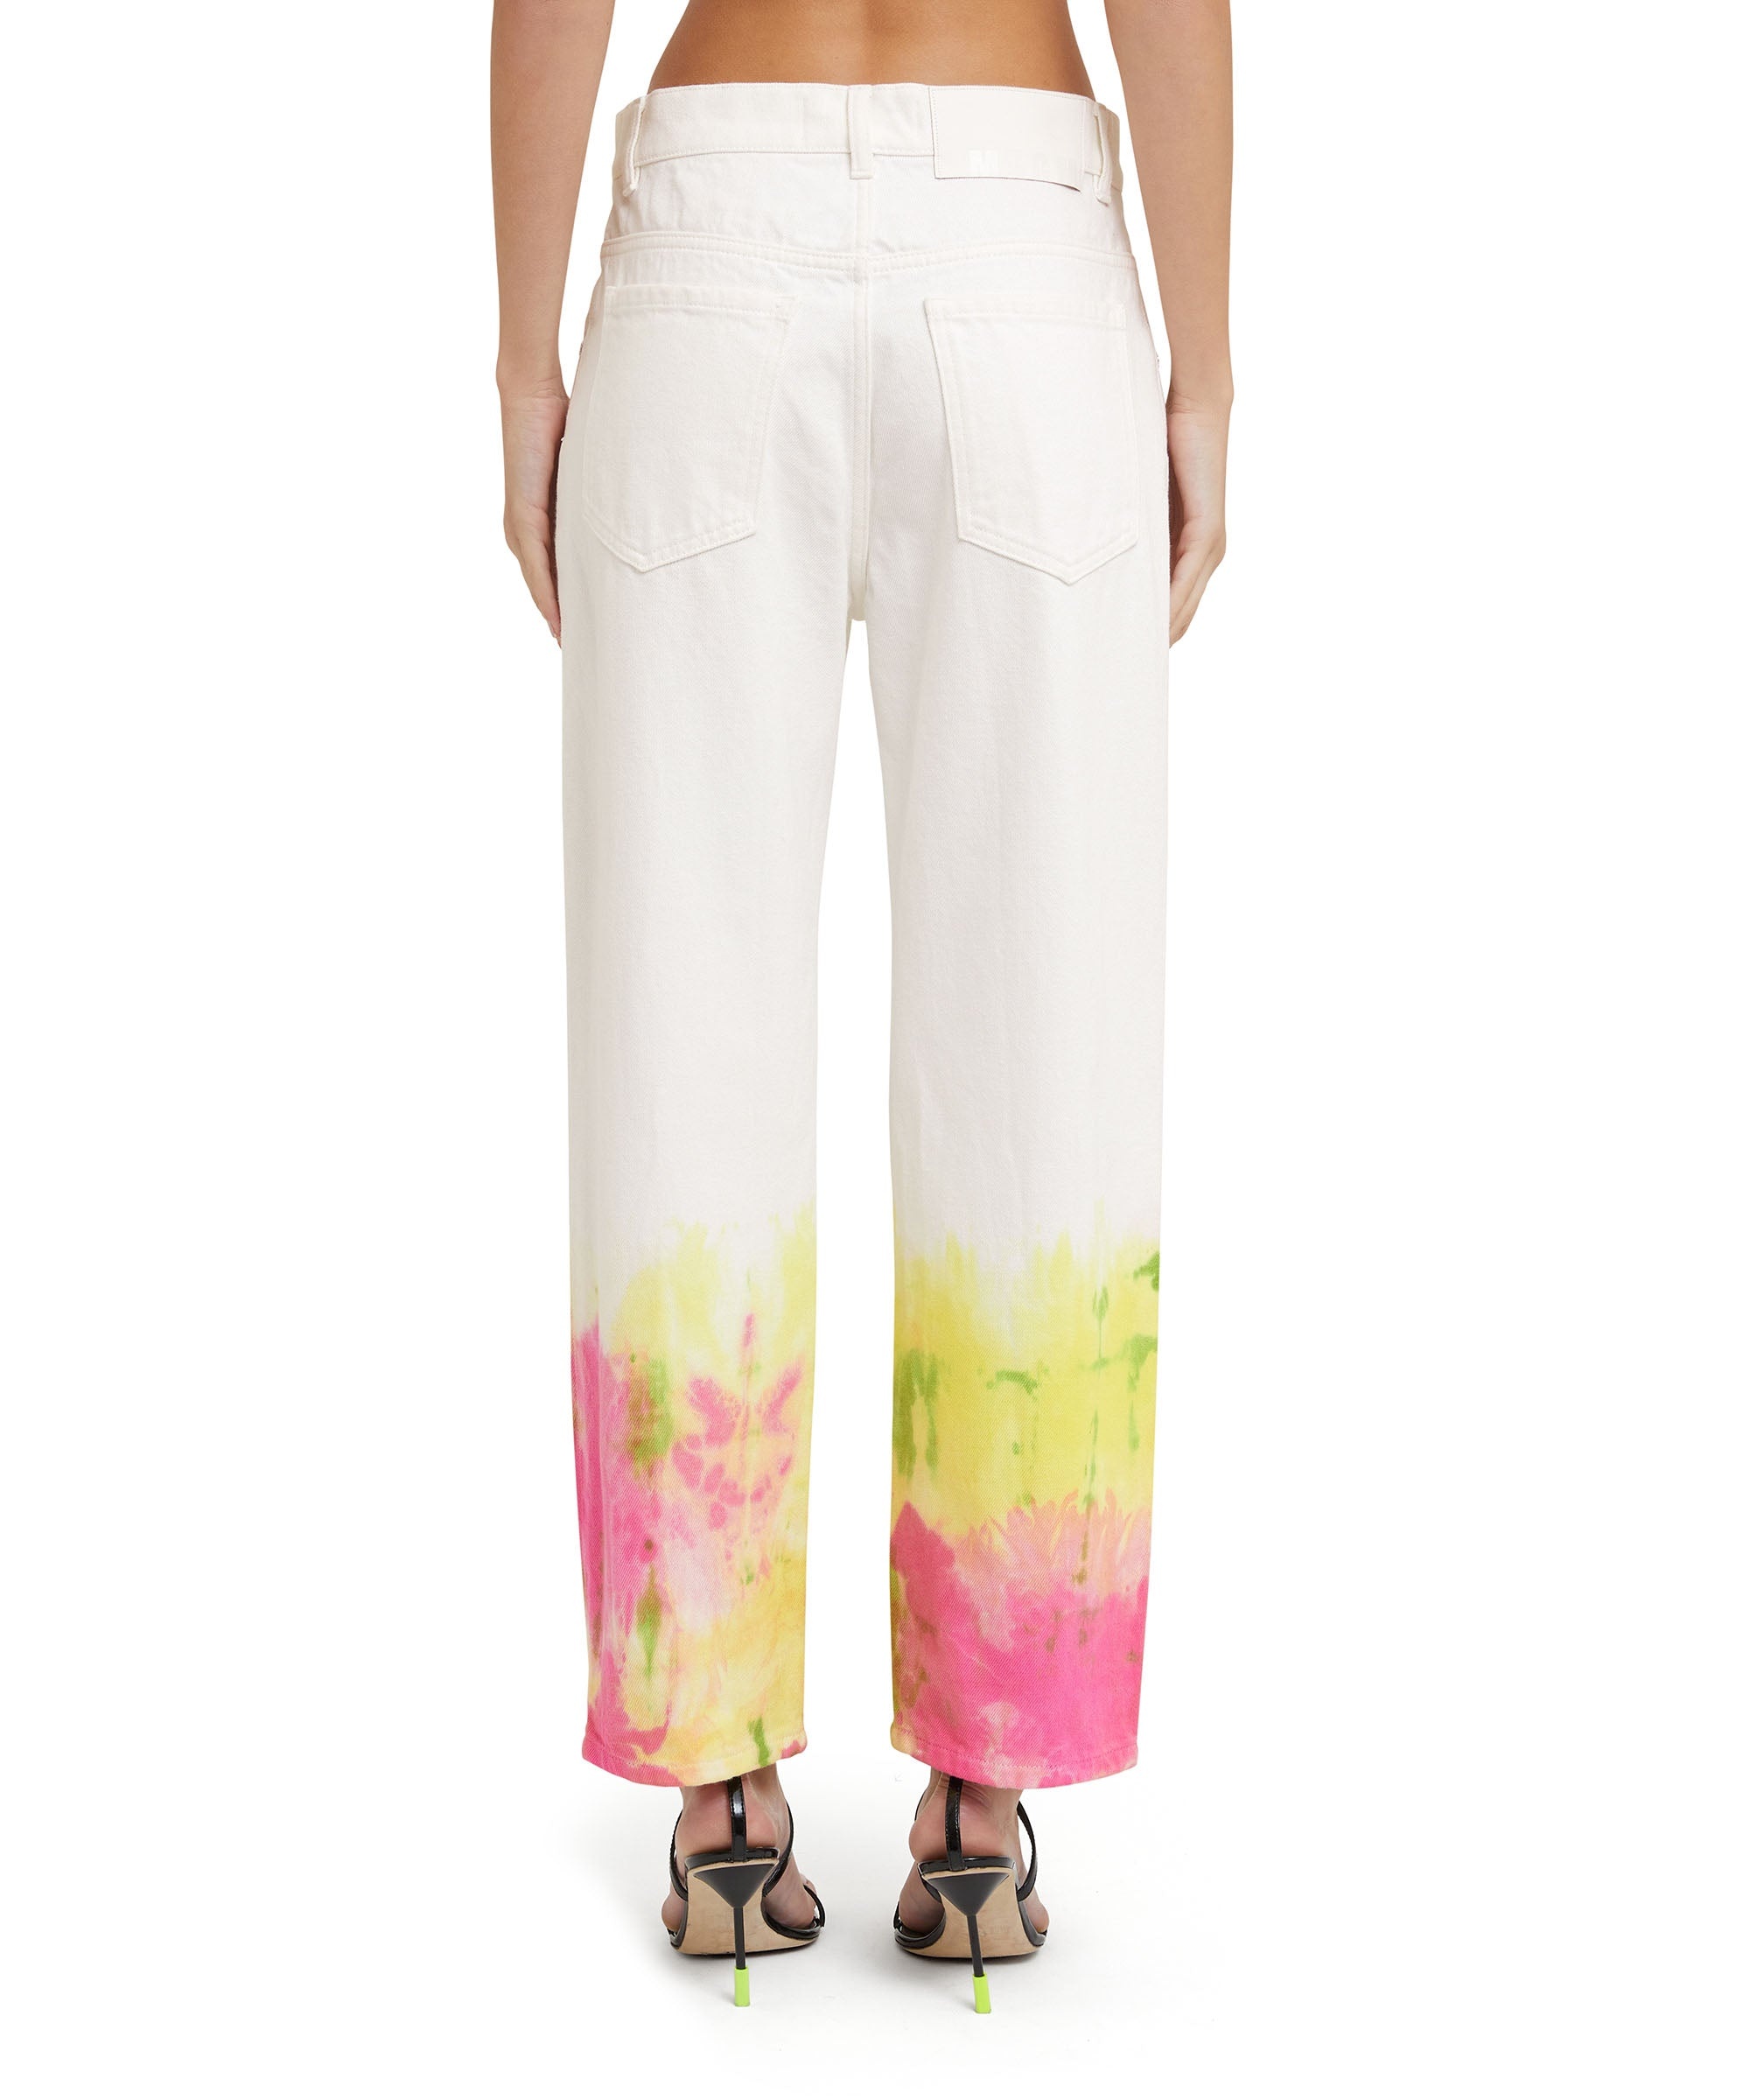 Bull cotton pants with tie-dye treatment - 3